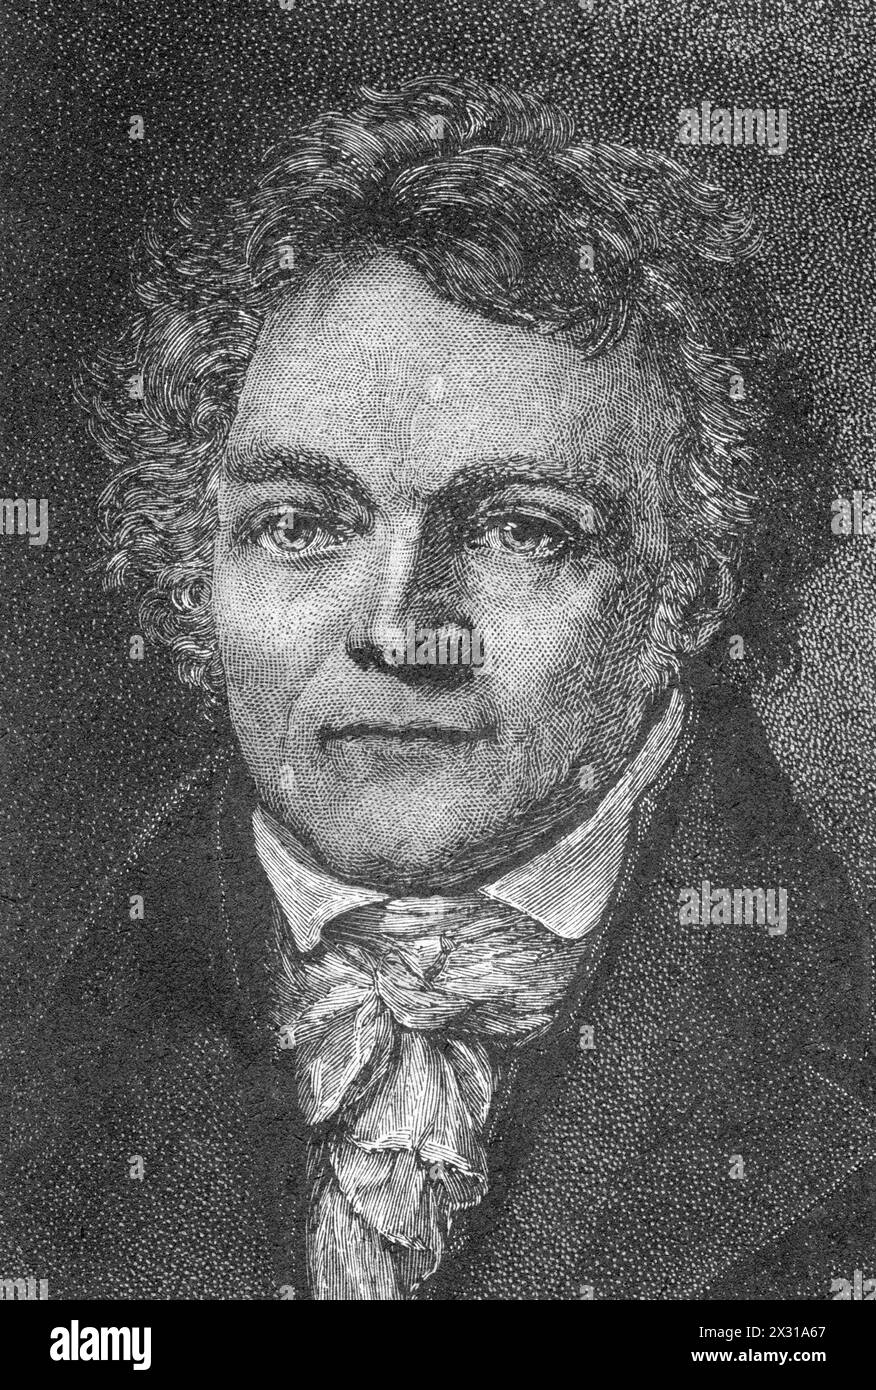 Senefelder, Alois, 6.11.1771 - 26.2.1834, Austrian printer and contrivancer, wood engraving, later 19, ADDITIONAL-RIGHTS-CLEARANCE-INFO-NOT-AVAILABLE Stock Photo